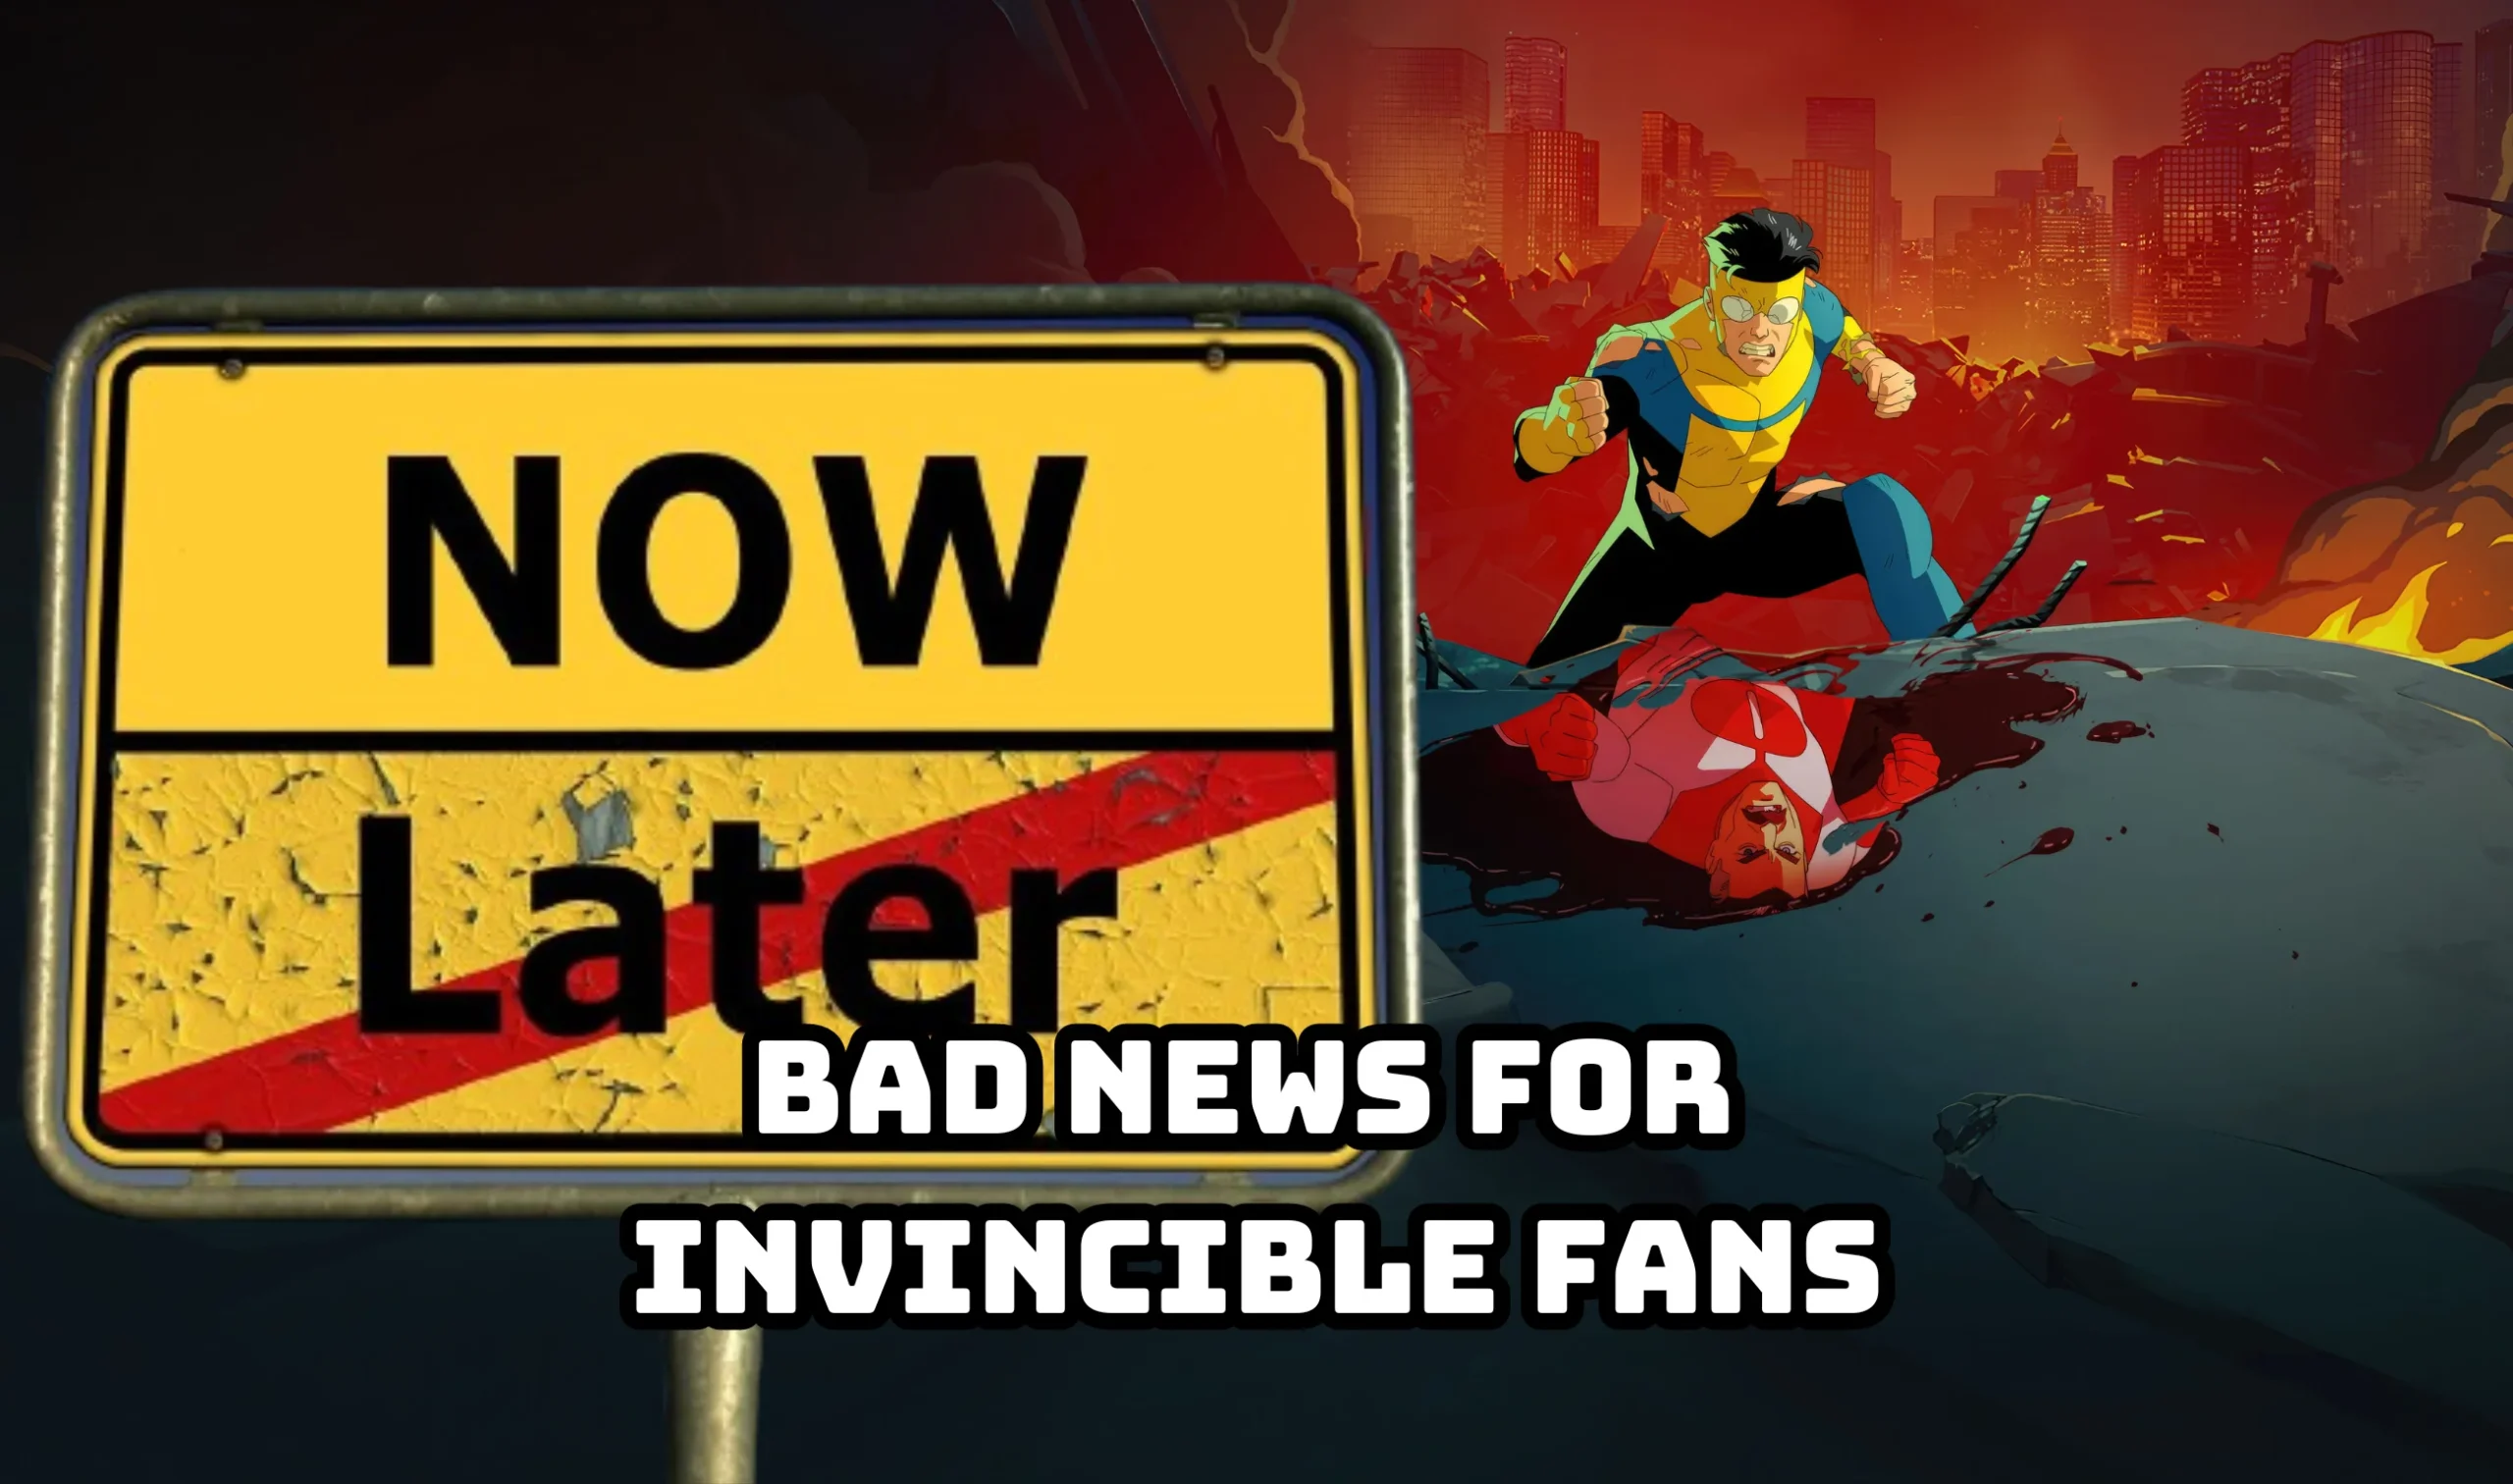 Weekly News 3: New Superman Casting, Bad News For Invincible Fans